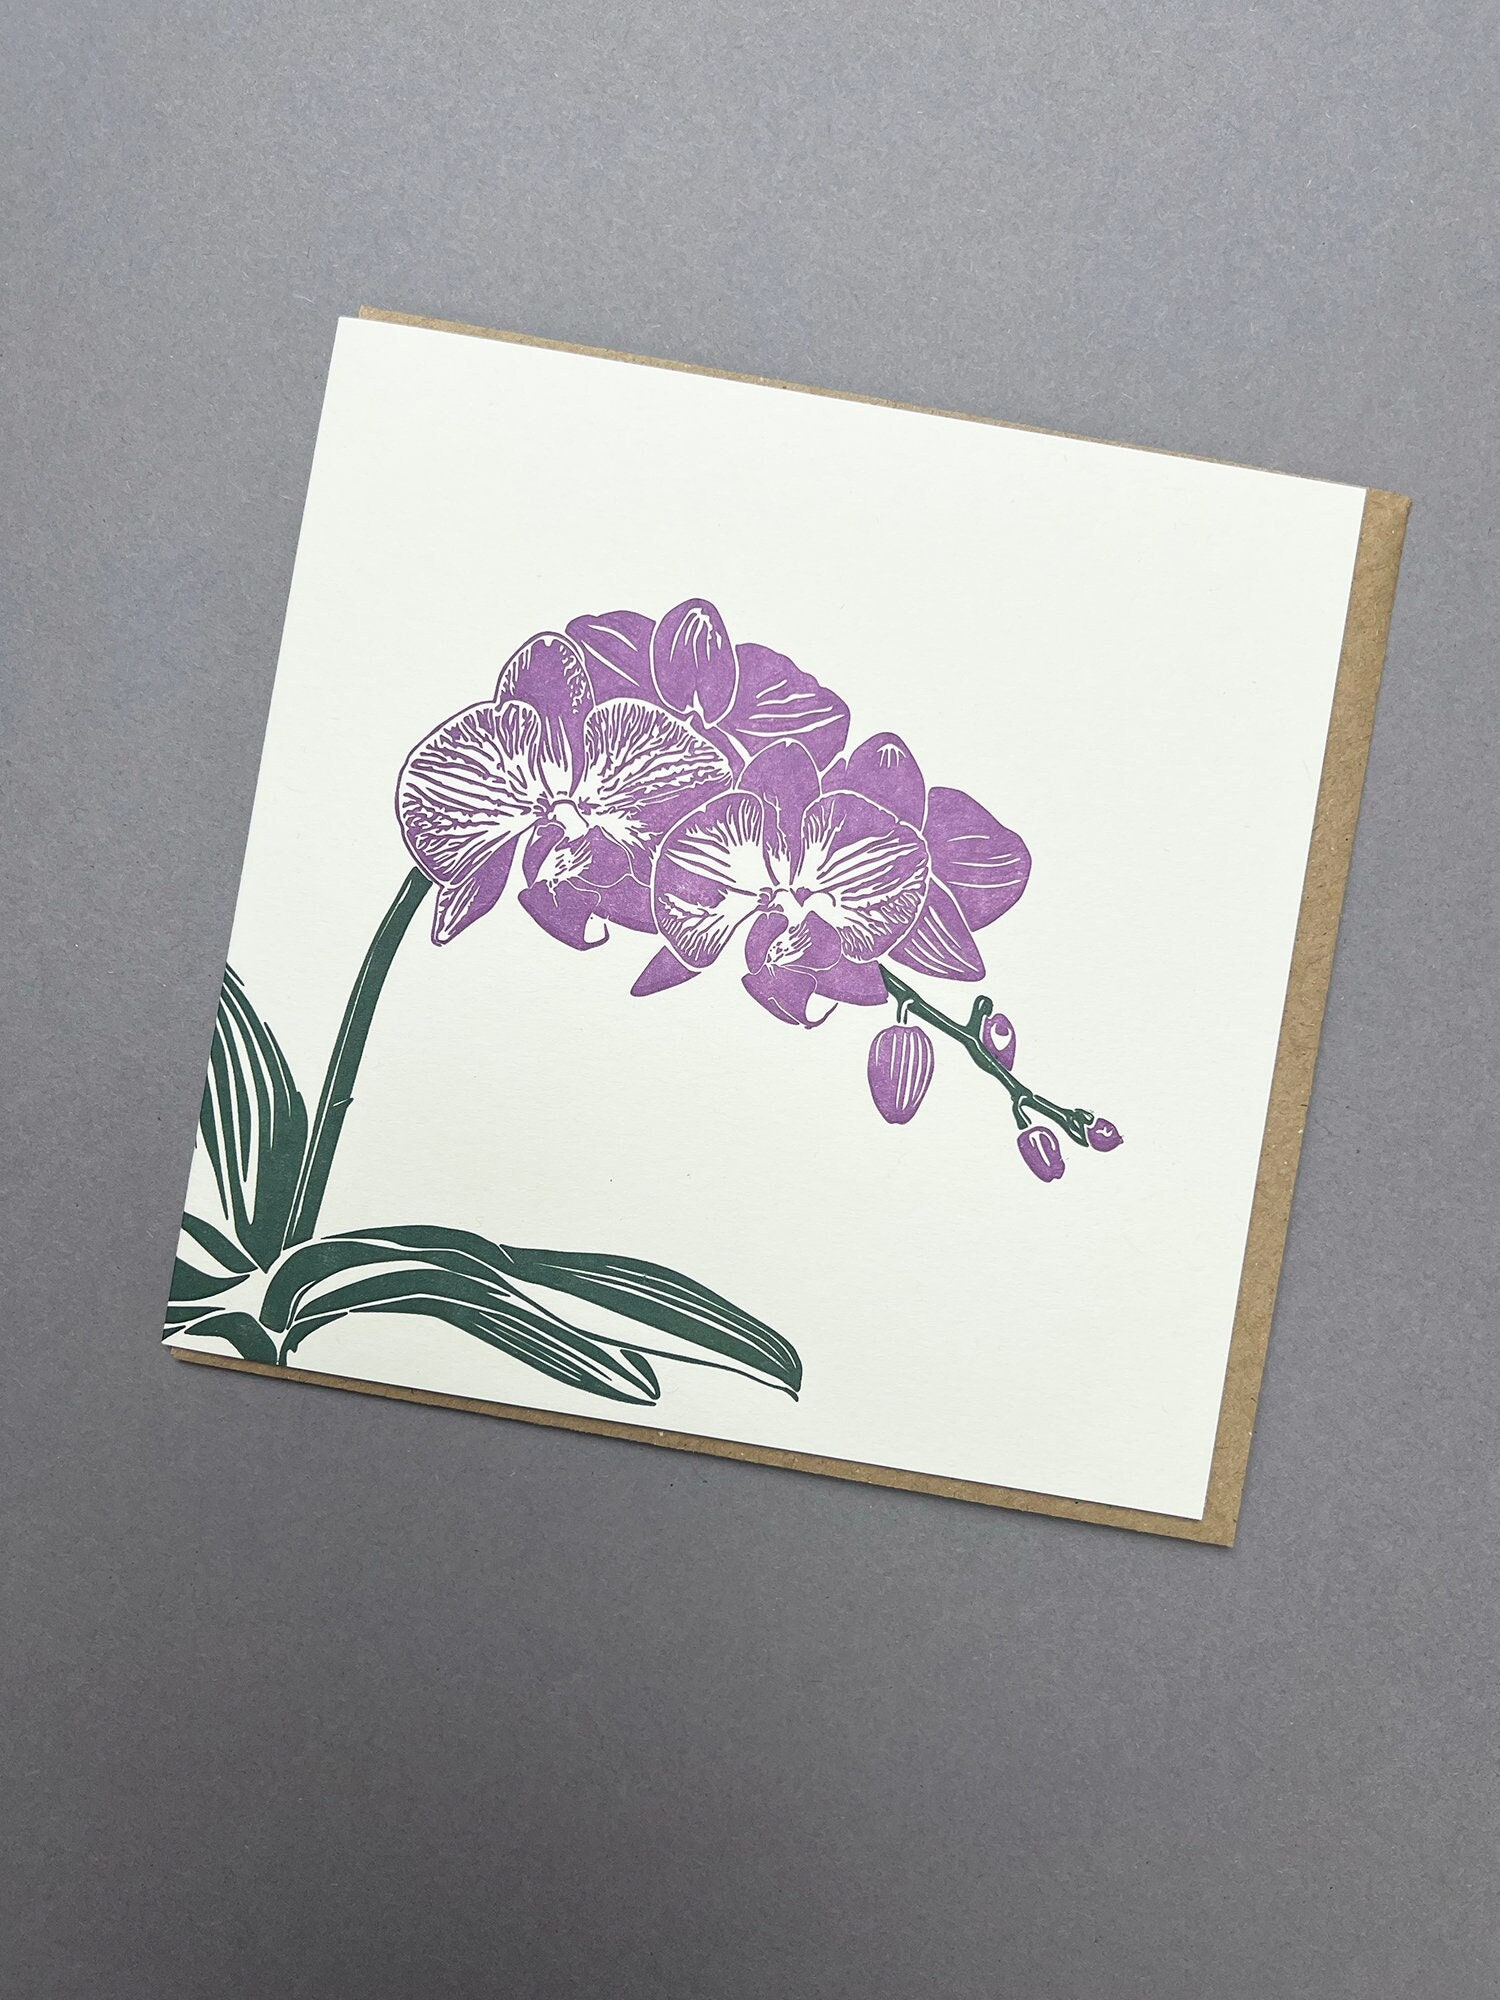 Orchid Card Instructions (Shipped)